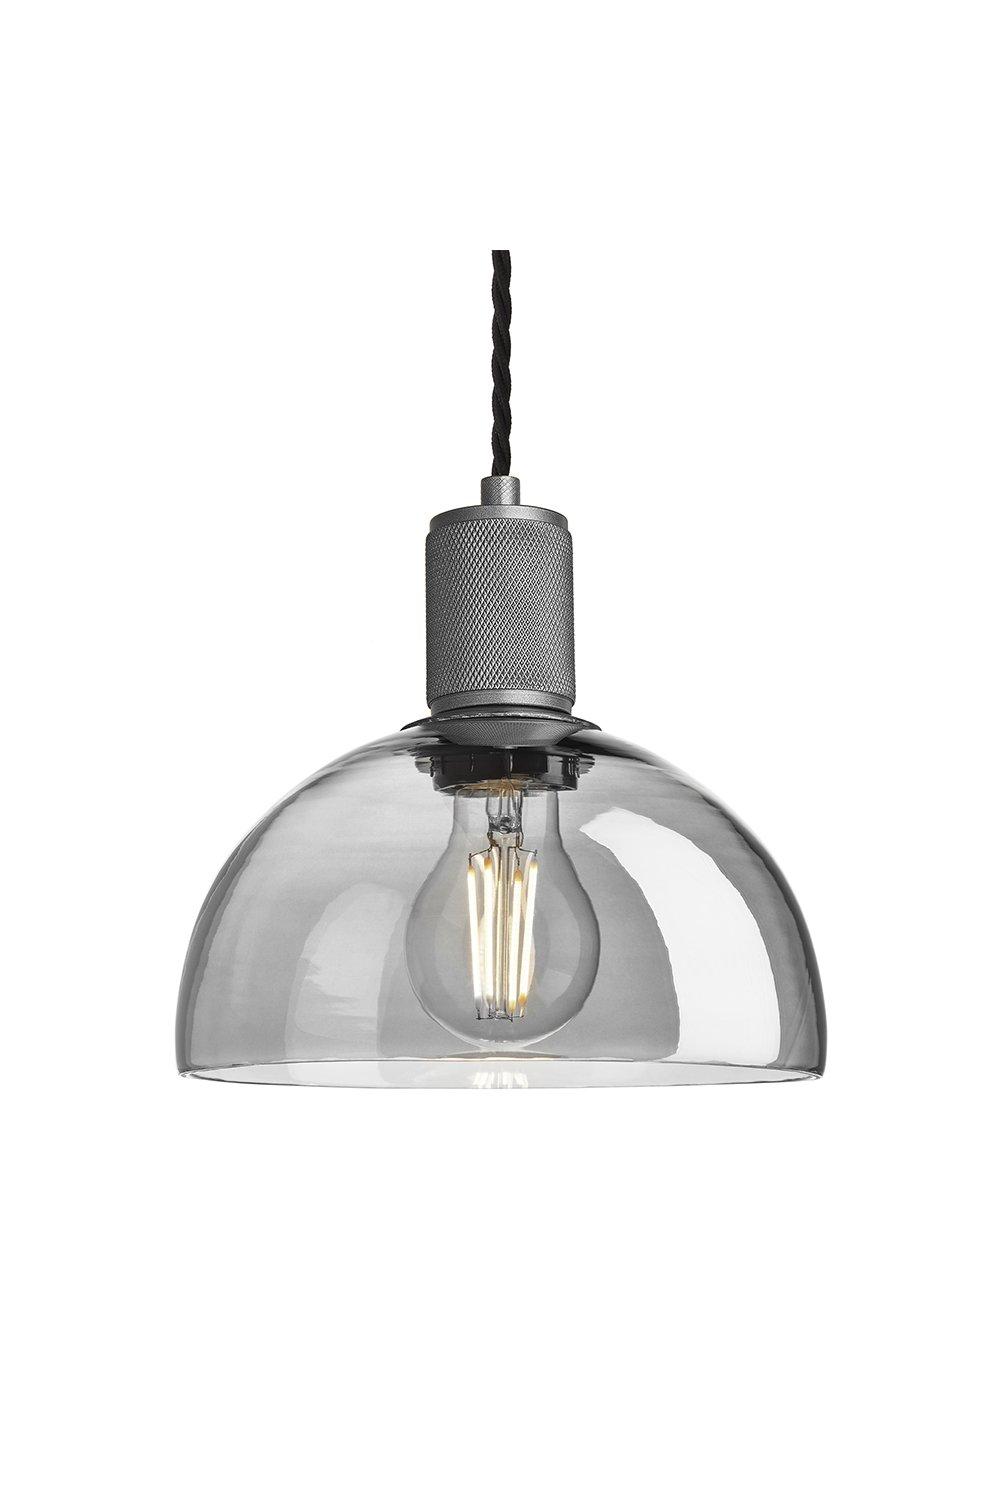 Knurled Tinted Glass Dome Pendant Light, 8 Inch, Smoke Grey, Pewter Holder